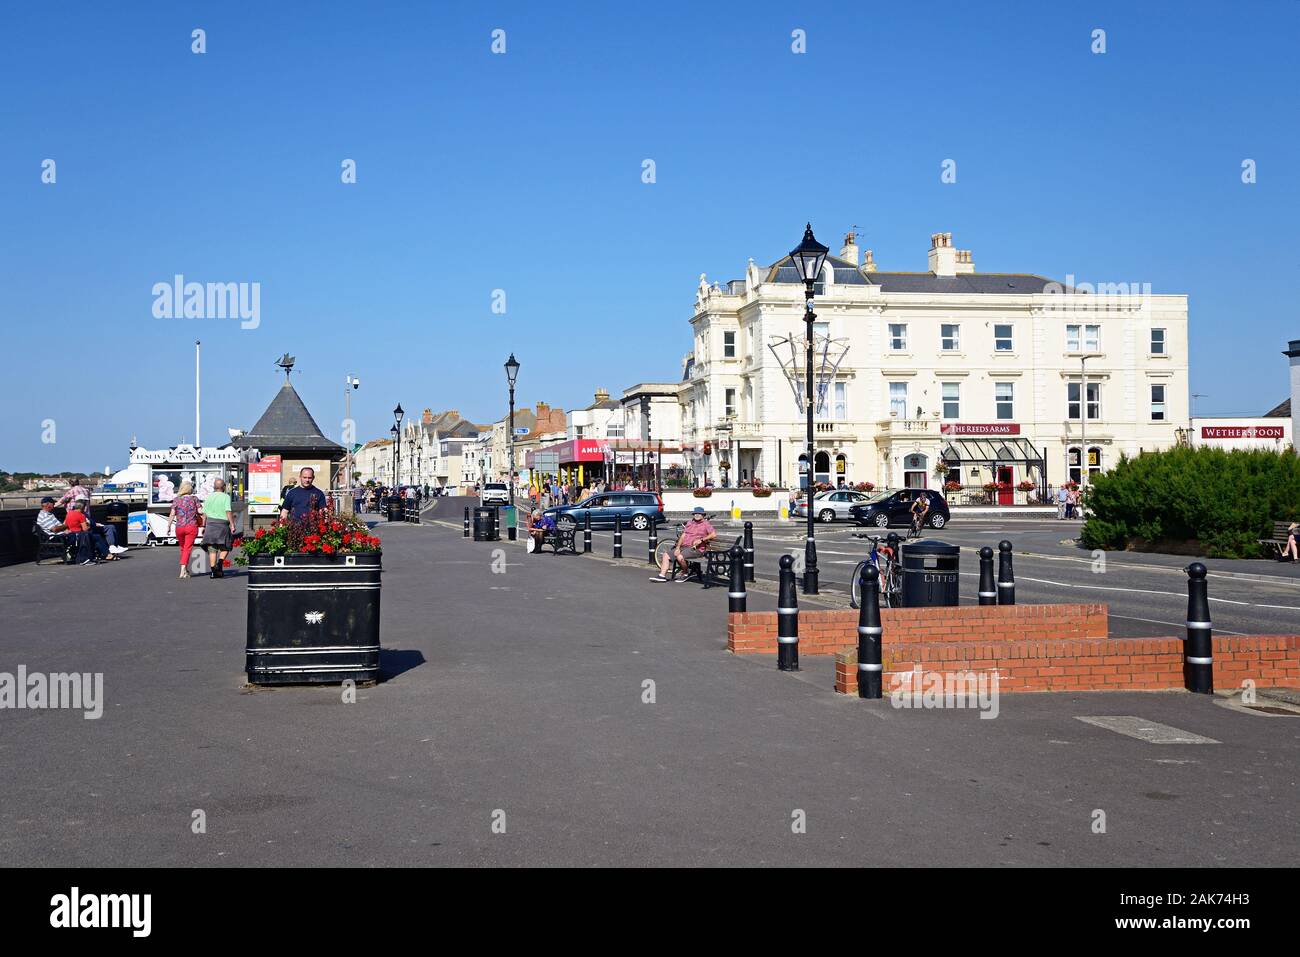 View along The Esplanade on the waterfront with tourists enjoying the setting, Burnham-on-Sea, England, UK. Stock Photo